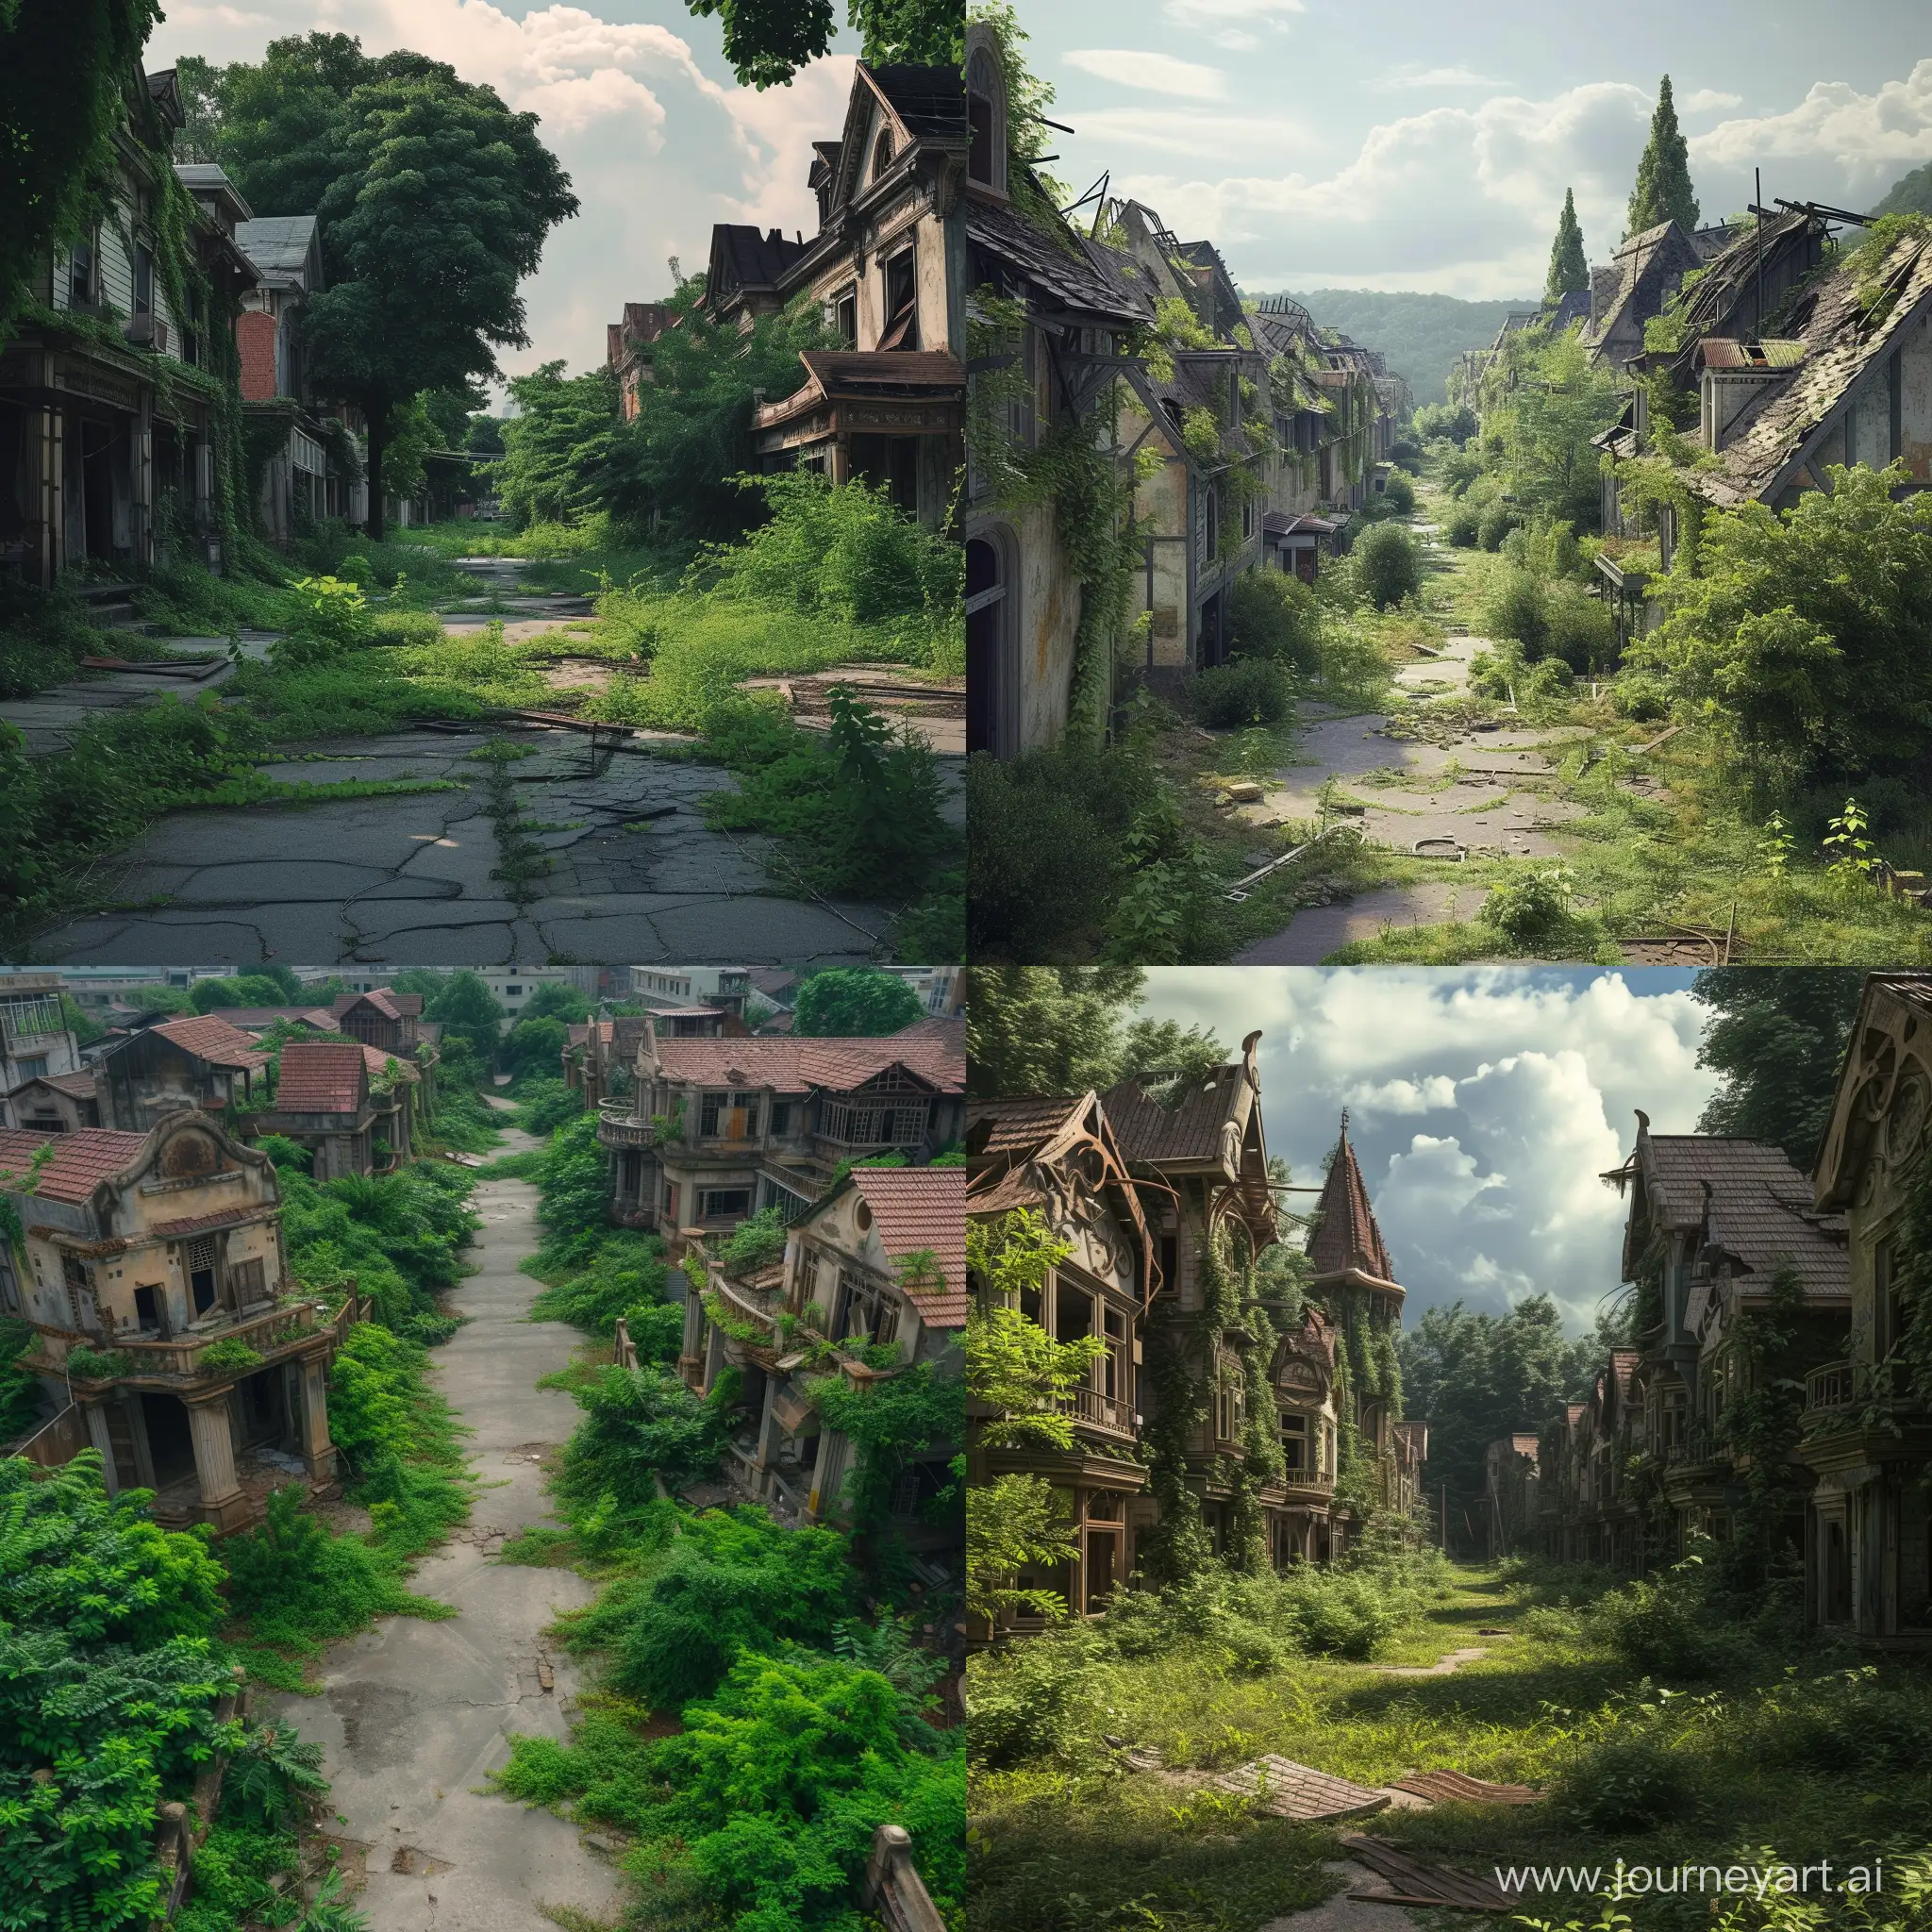 an abandoned metropolis without inhabitants, dilapidated streets and houses, greenery